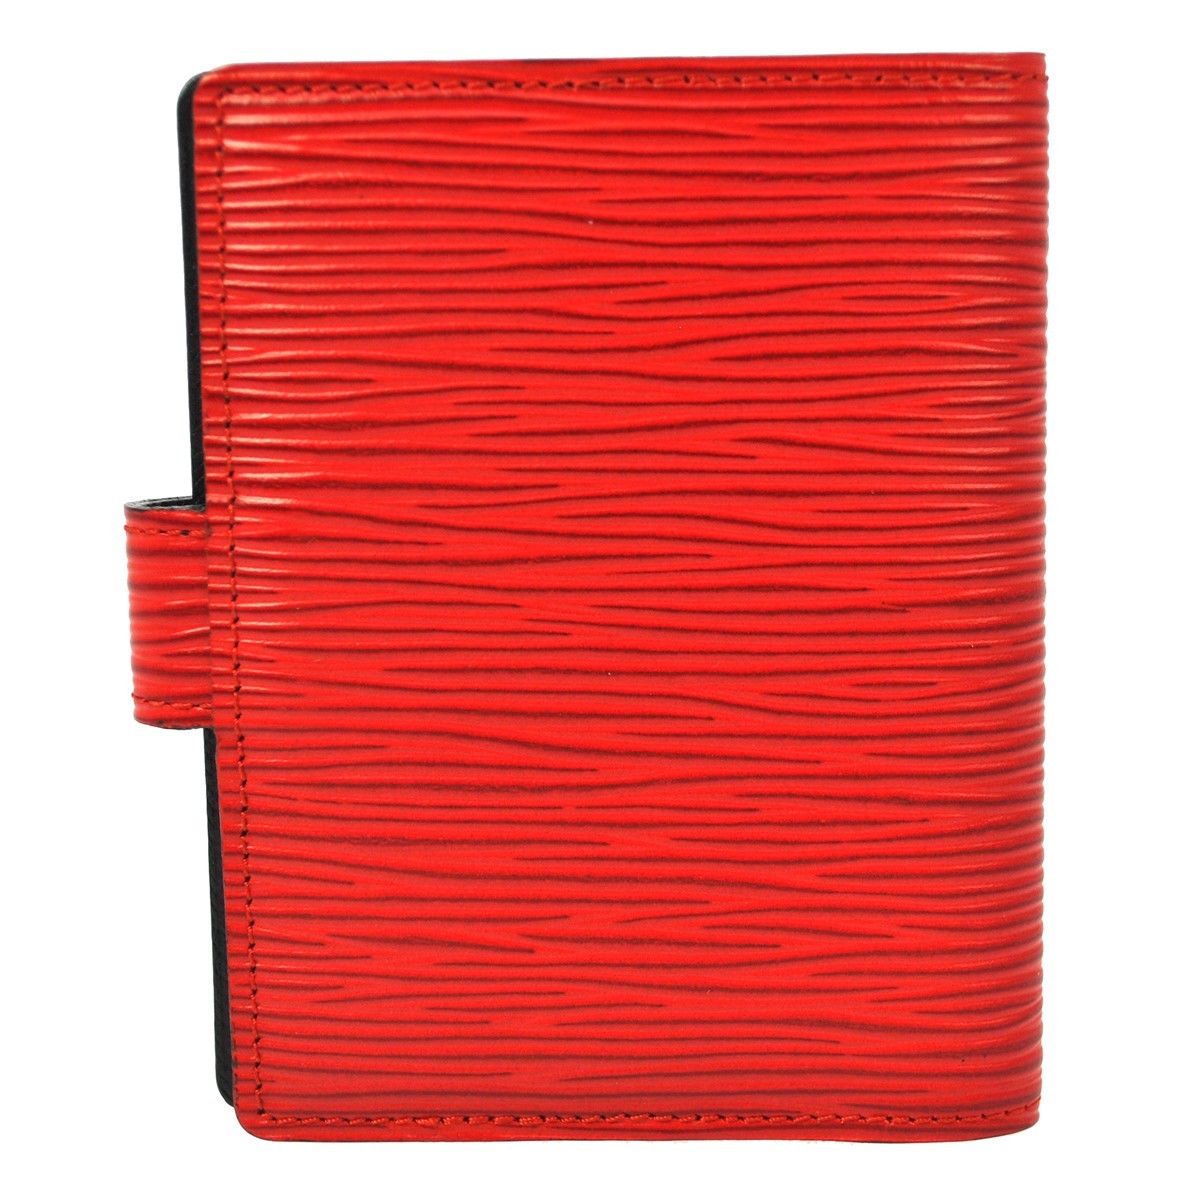 Louis Vuitton Red Epi Leather Cardholder